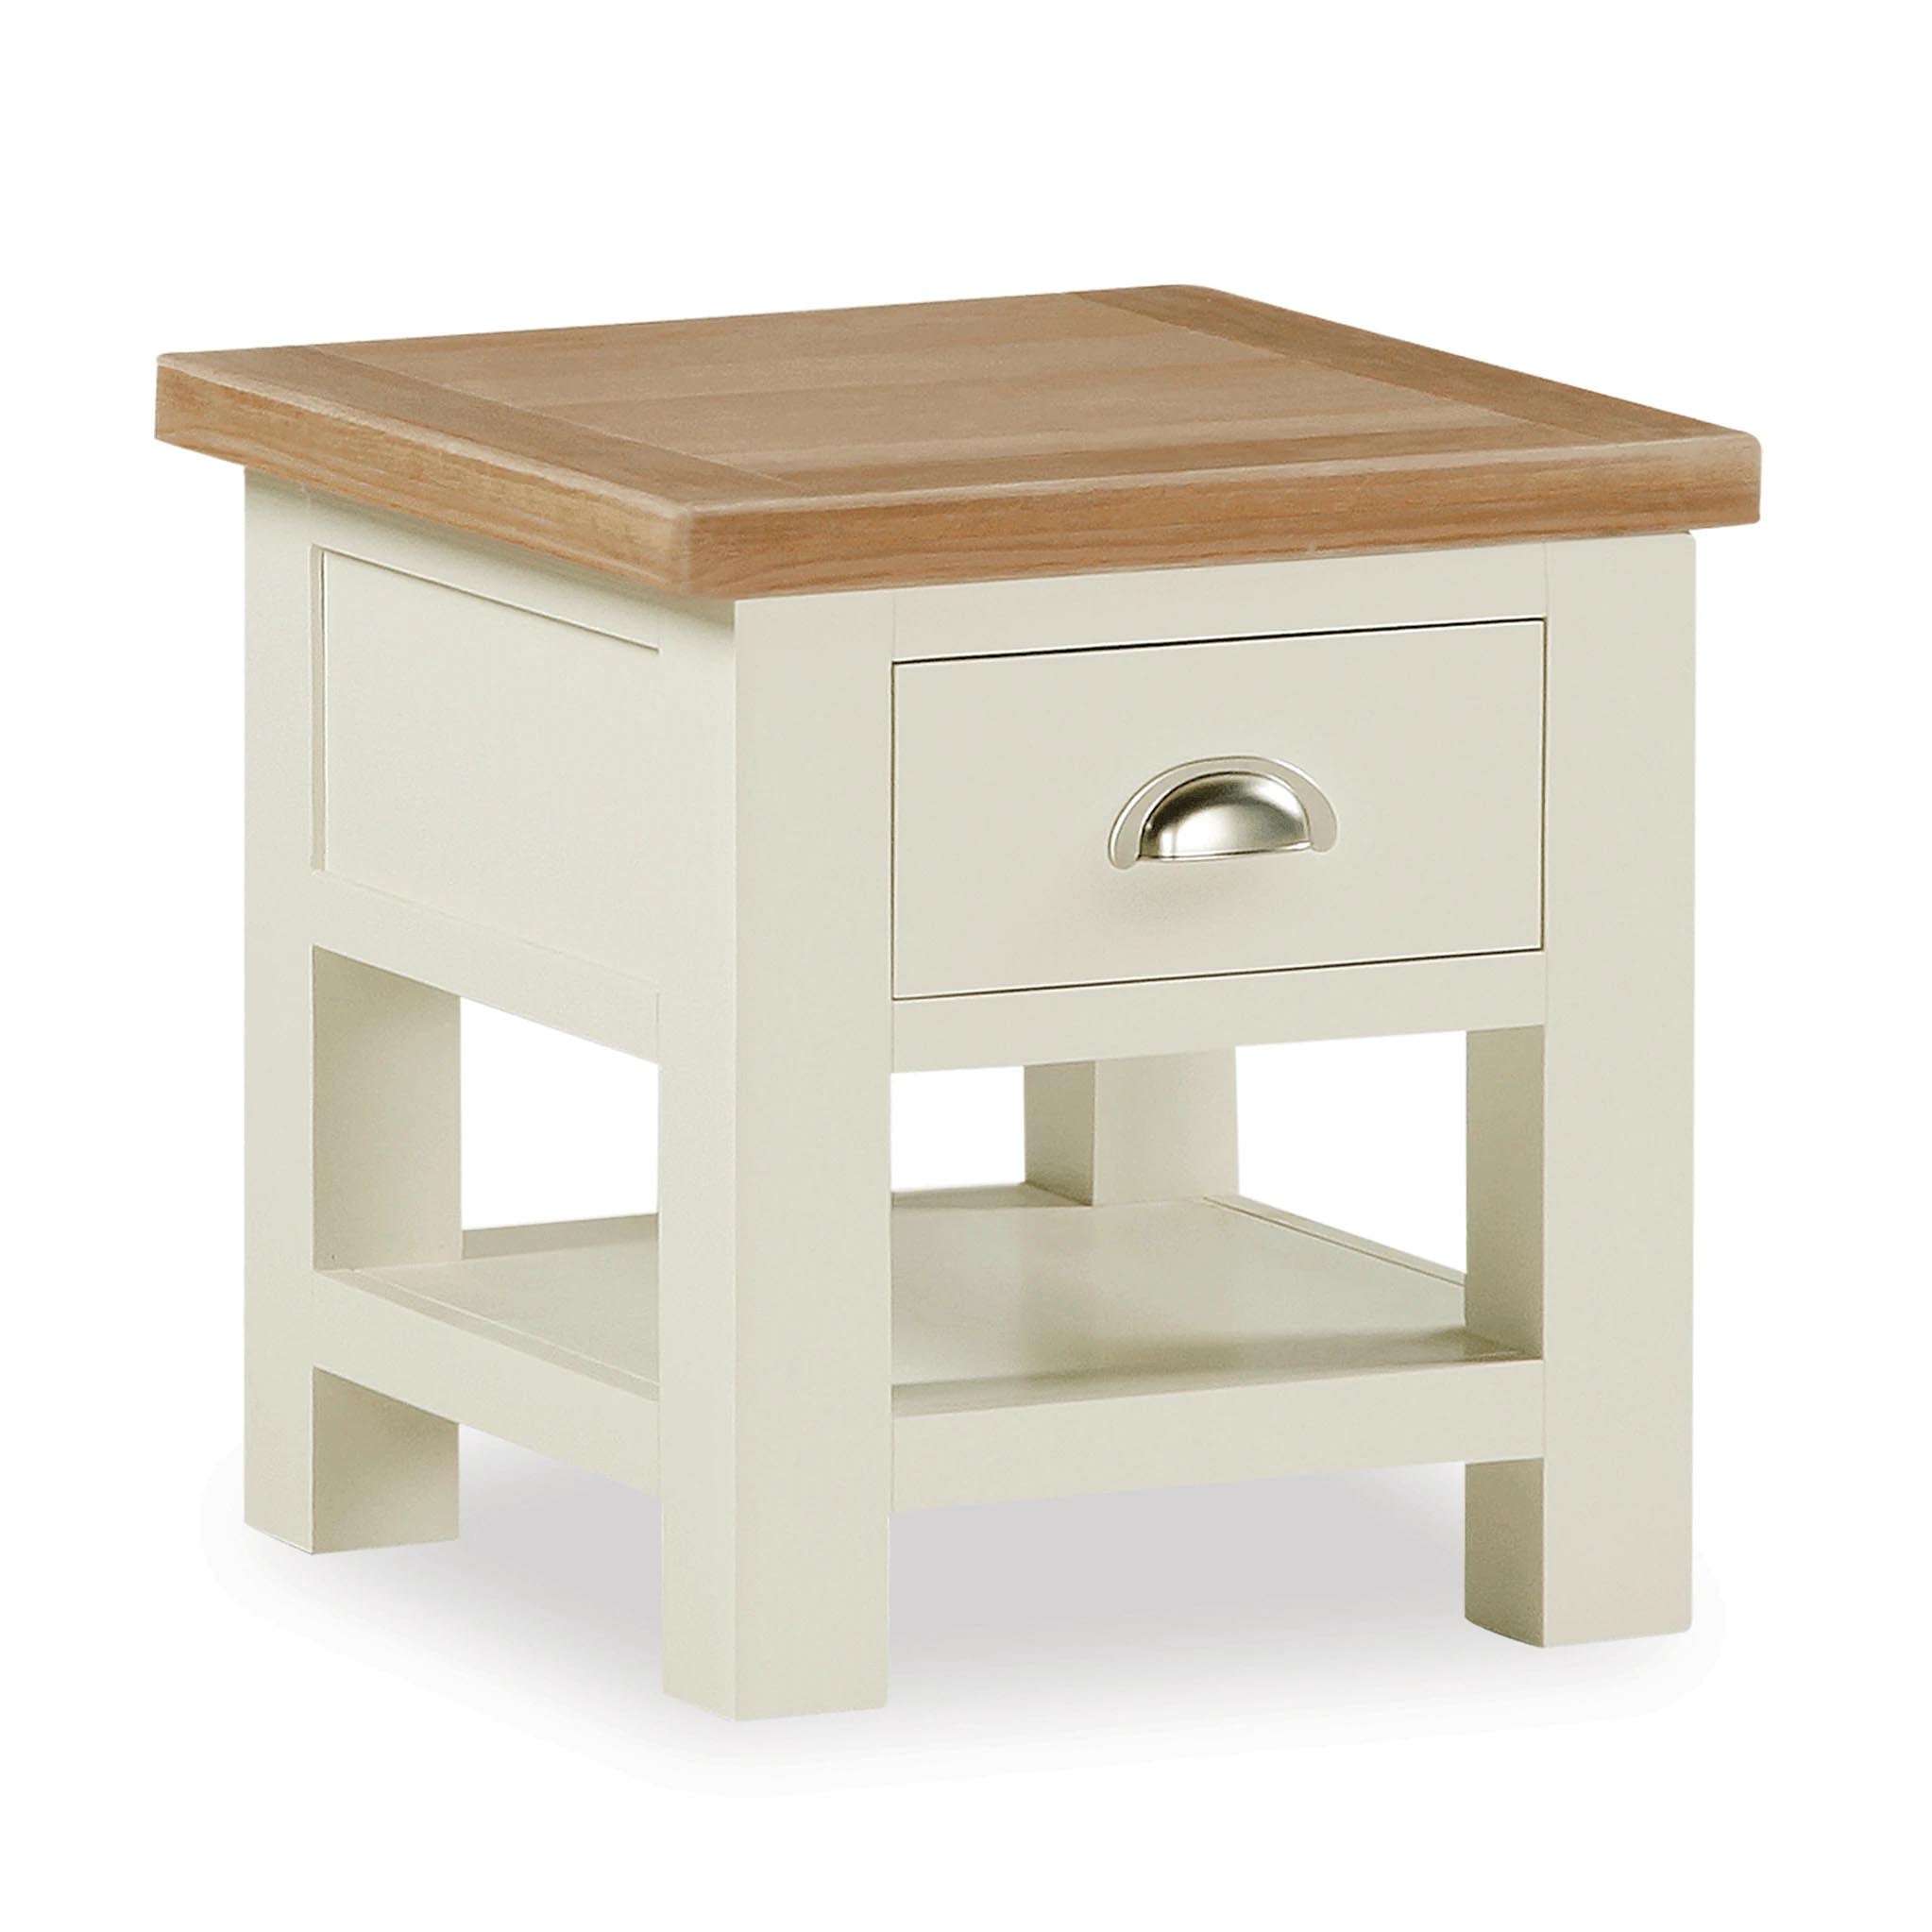 Daymer Cream Painted Lamp Table With Drawer Oak